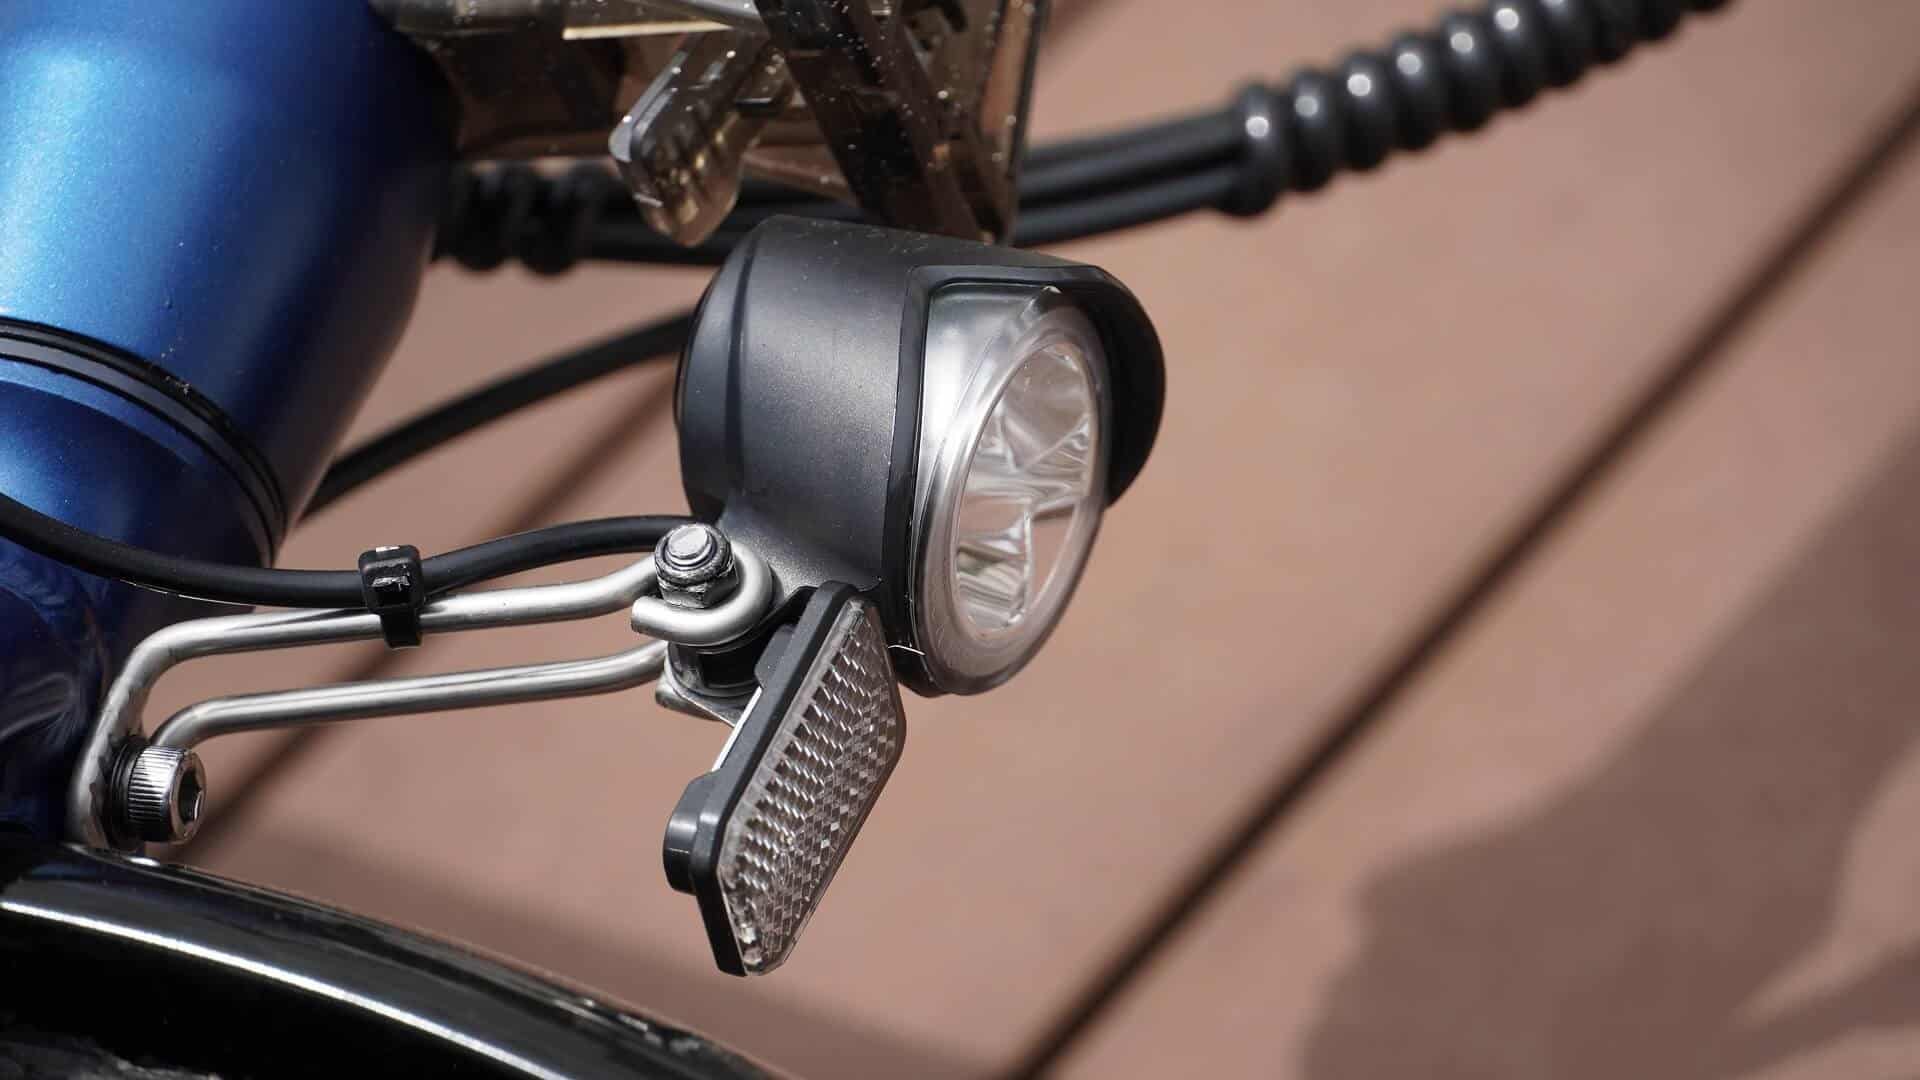 MOBOT S3 (NAVY BLUE) electric bicycle front light